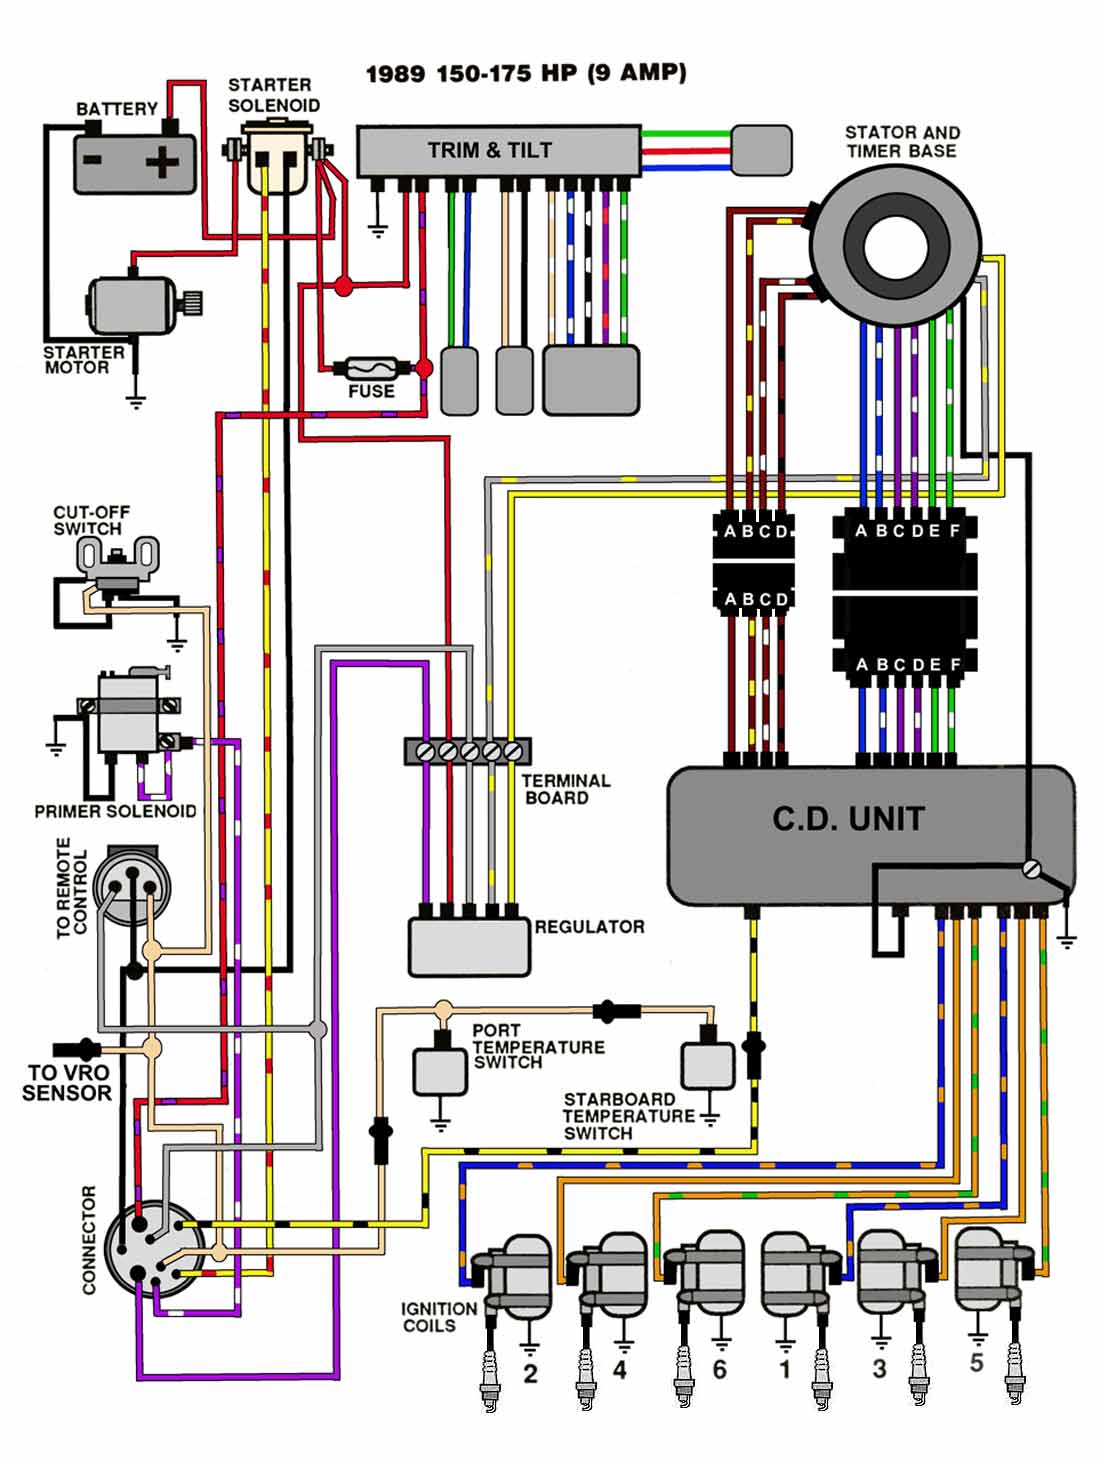 Ignition Switch Wiring Diagram Boats from maxrules.com